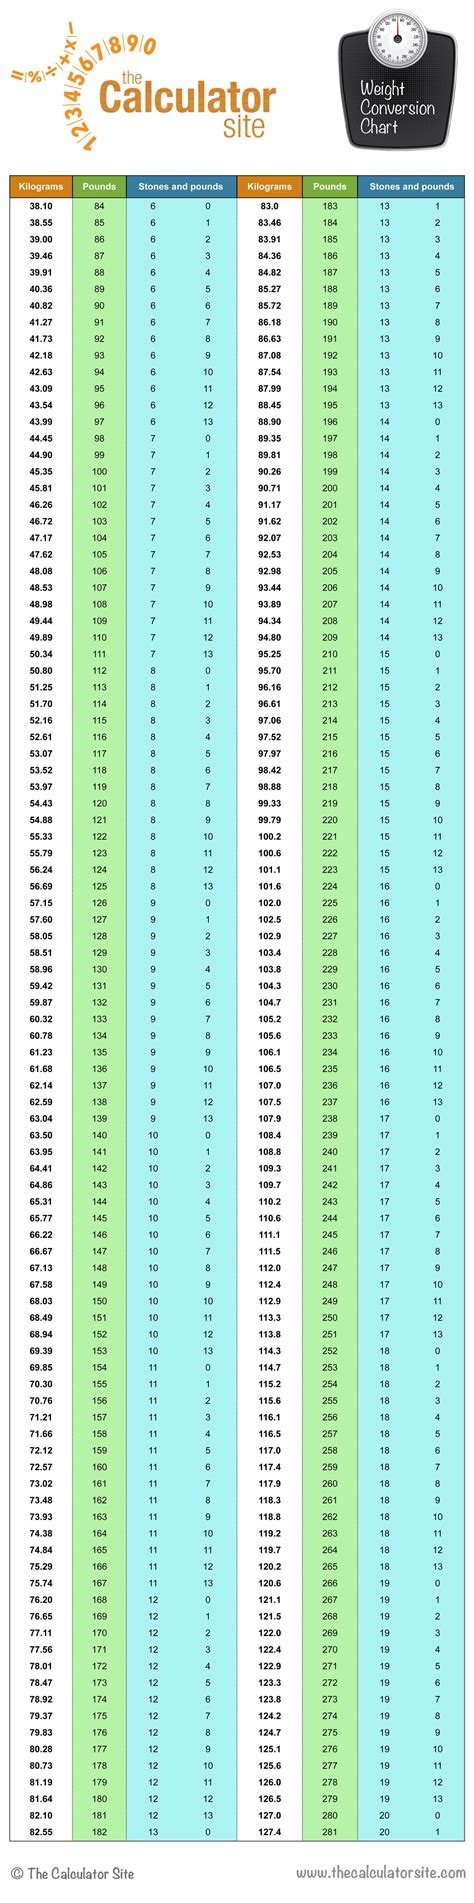 Pounds to stones and pounds conversion - Task: Convert 10 stones to pounds (show work) Formula: stones x 14 = lb Calculations: 10 stones x 14 = 140 lb Result: 10 stones is equal to 140 lb. Conversion Table. For quick reference purposes, below is a conversion table that you can use to convert from stones to lb. Stones to Pounds Conversion Chart. stones (st) pounds (lb) 1 stones: